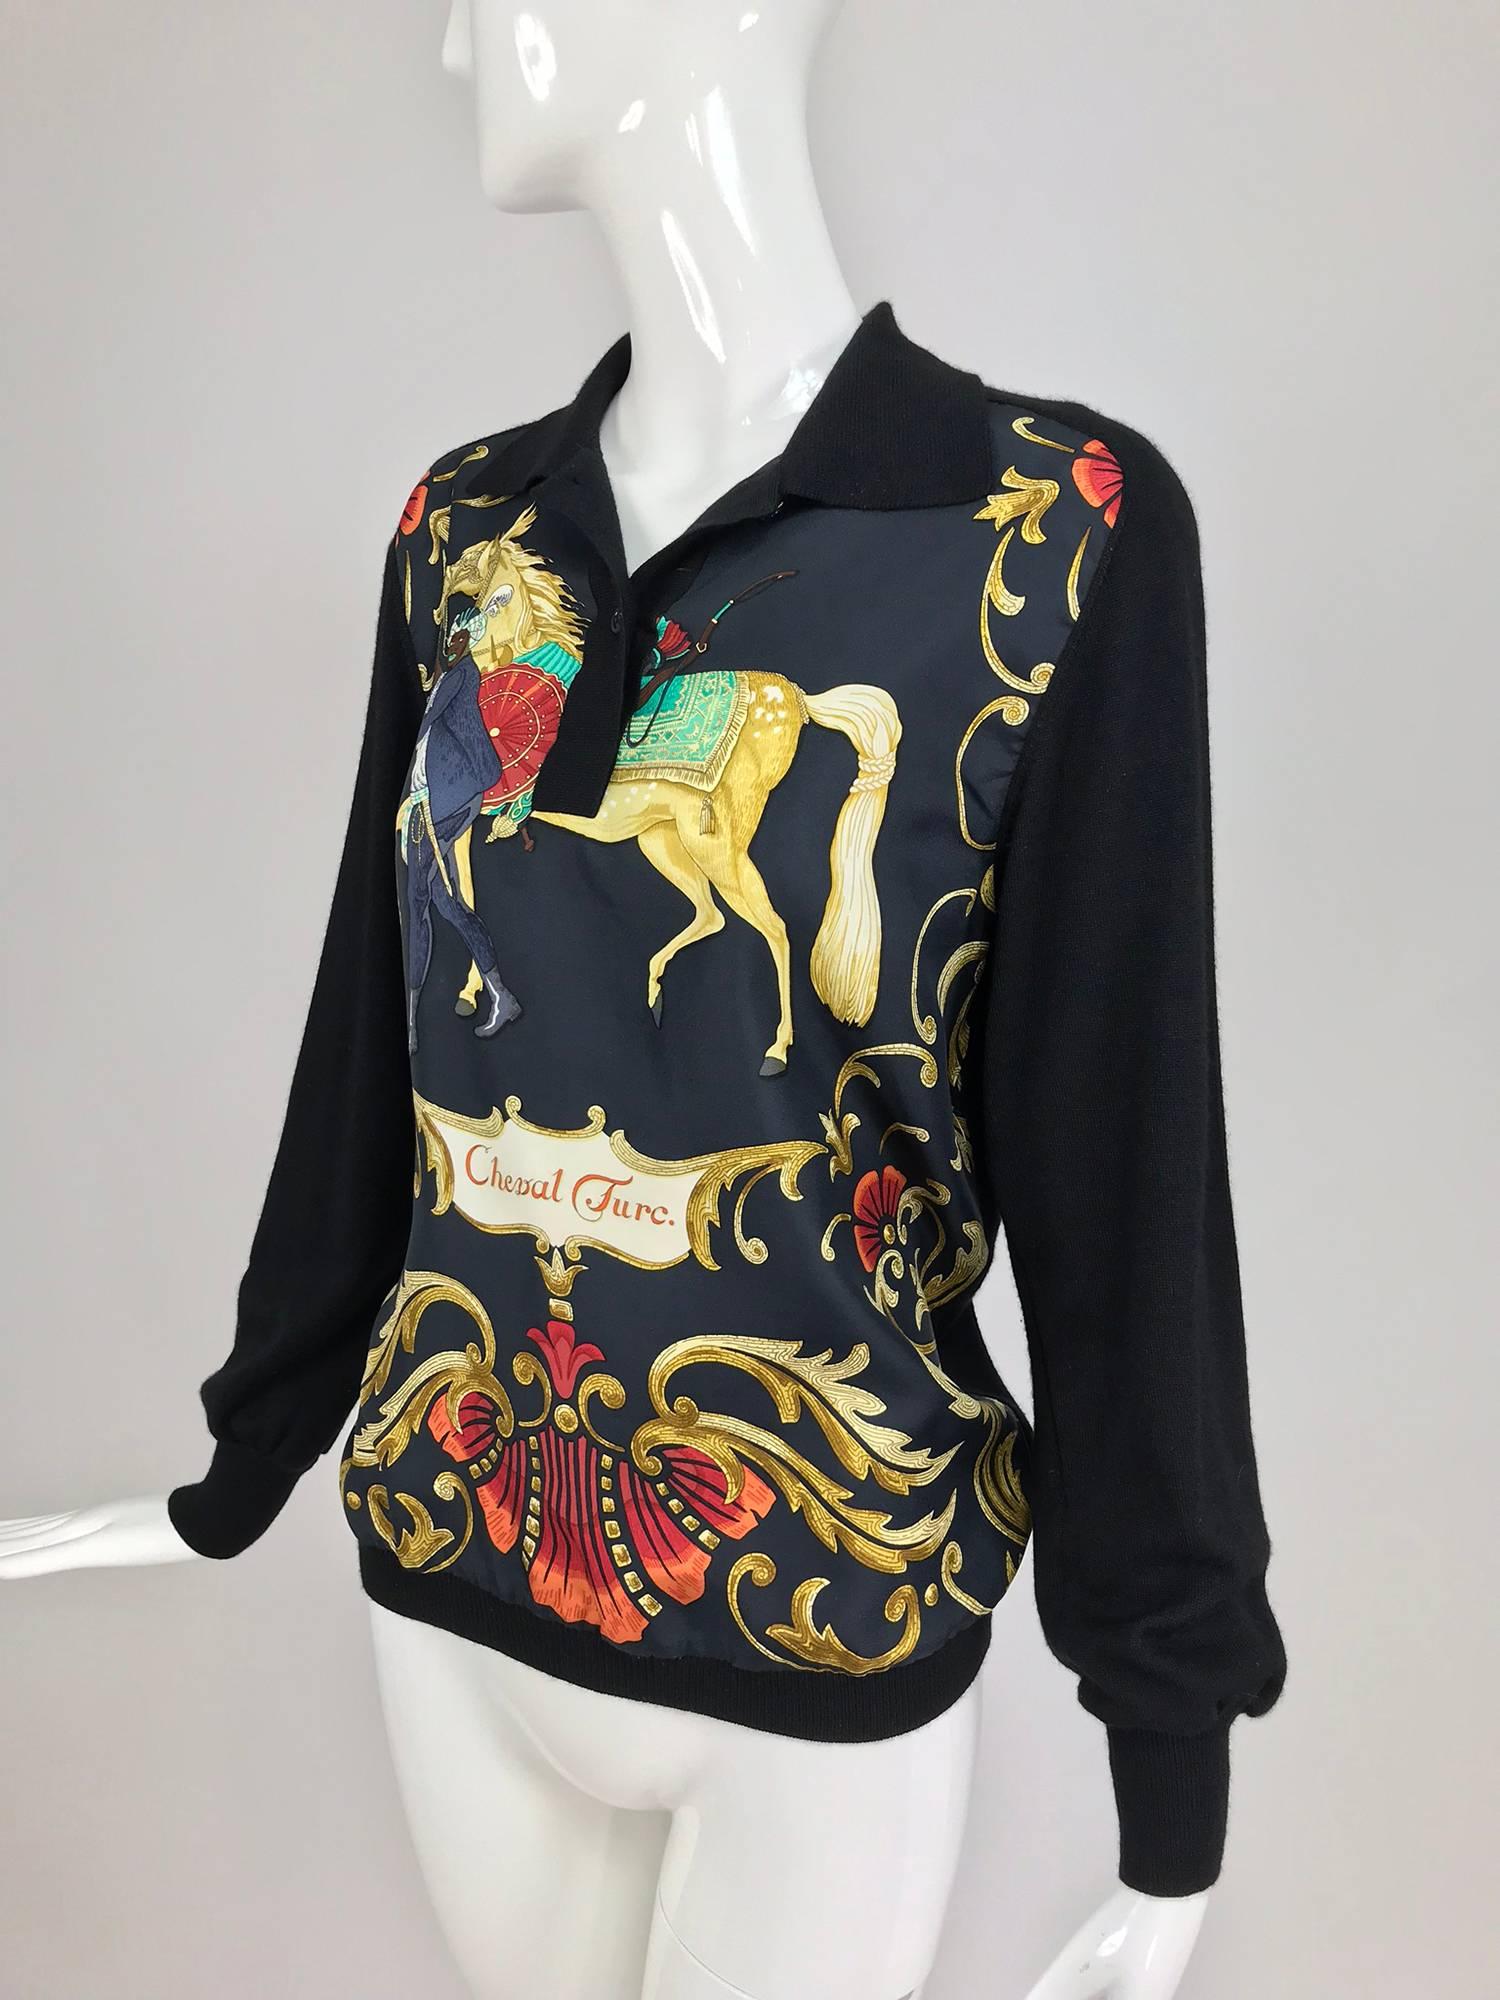 Hermes black fine wool sweater with silk Cheval Turc, printed silk twill front...Pull on top has raglan sleeves, button front placket with narrow collar, ribbed cuffs, the back is knitted...Marked size 36
In excellent wearable condition... All our